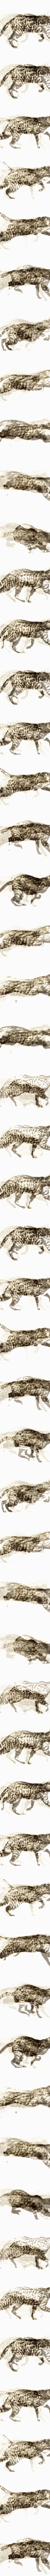 Cat Trotting, Changing To A Gallop (Hard-Light-5-0.021-116)